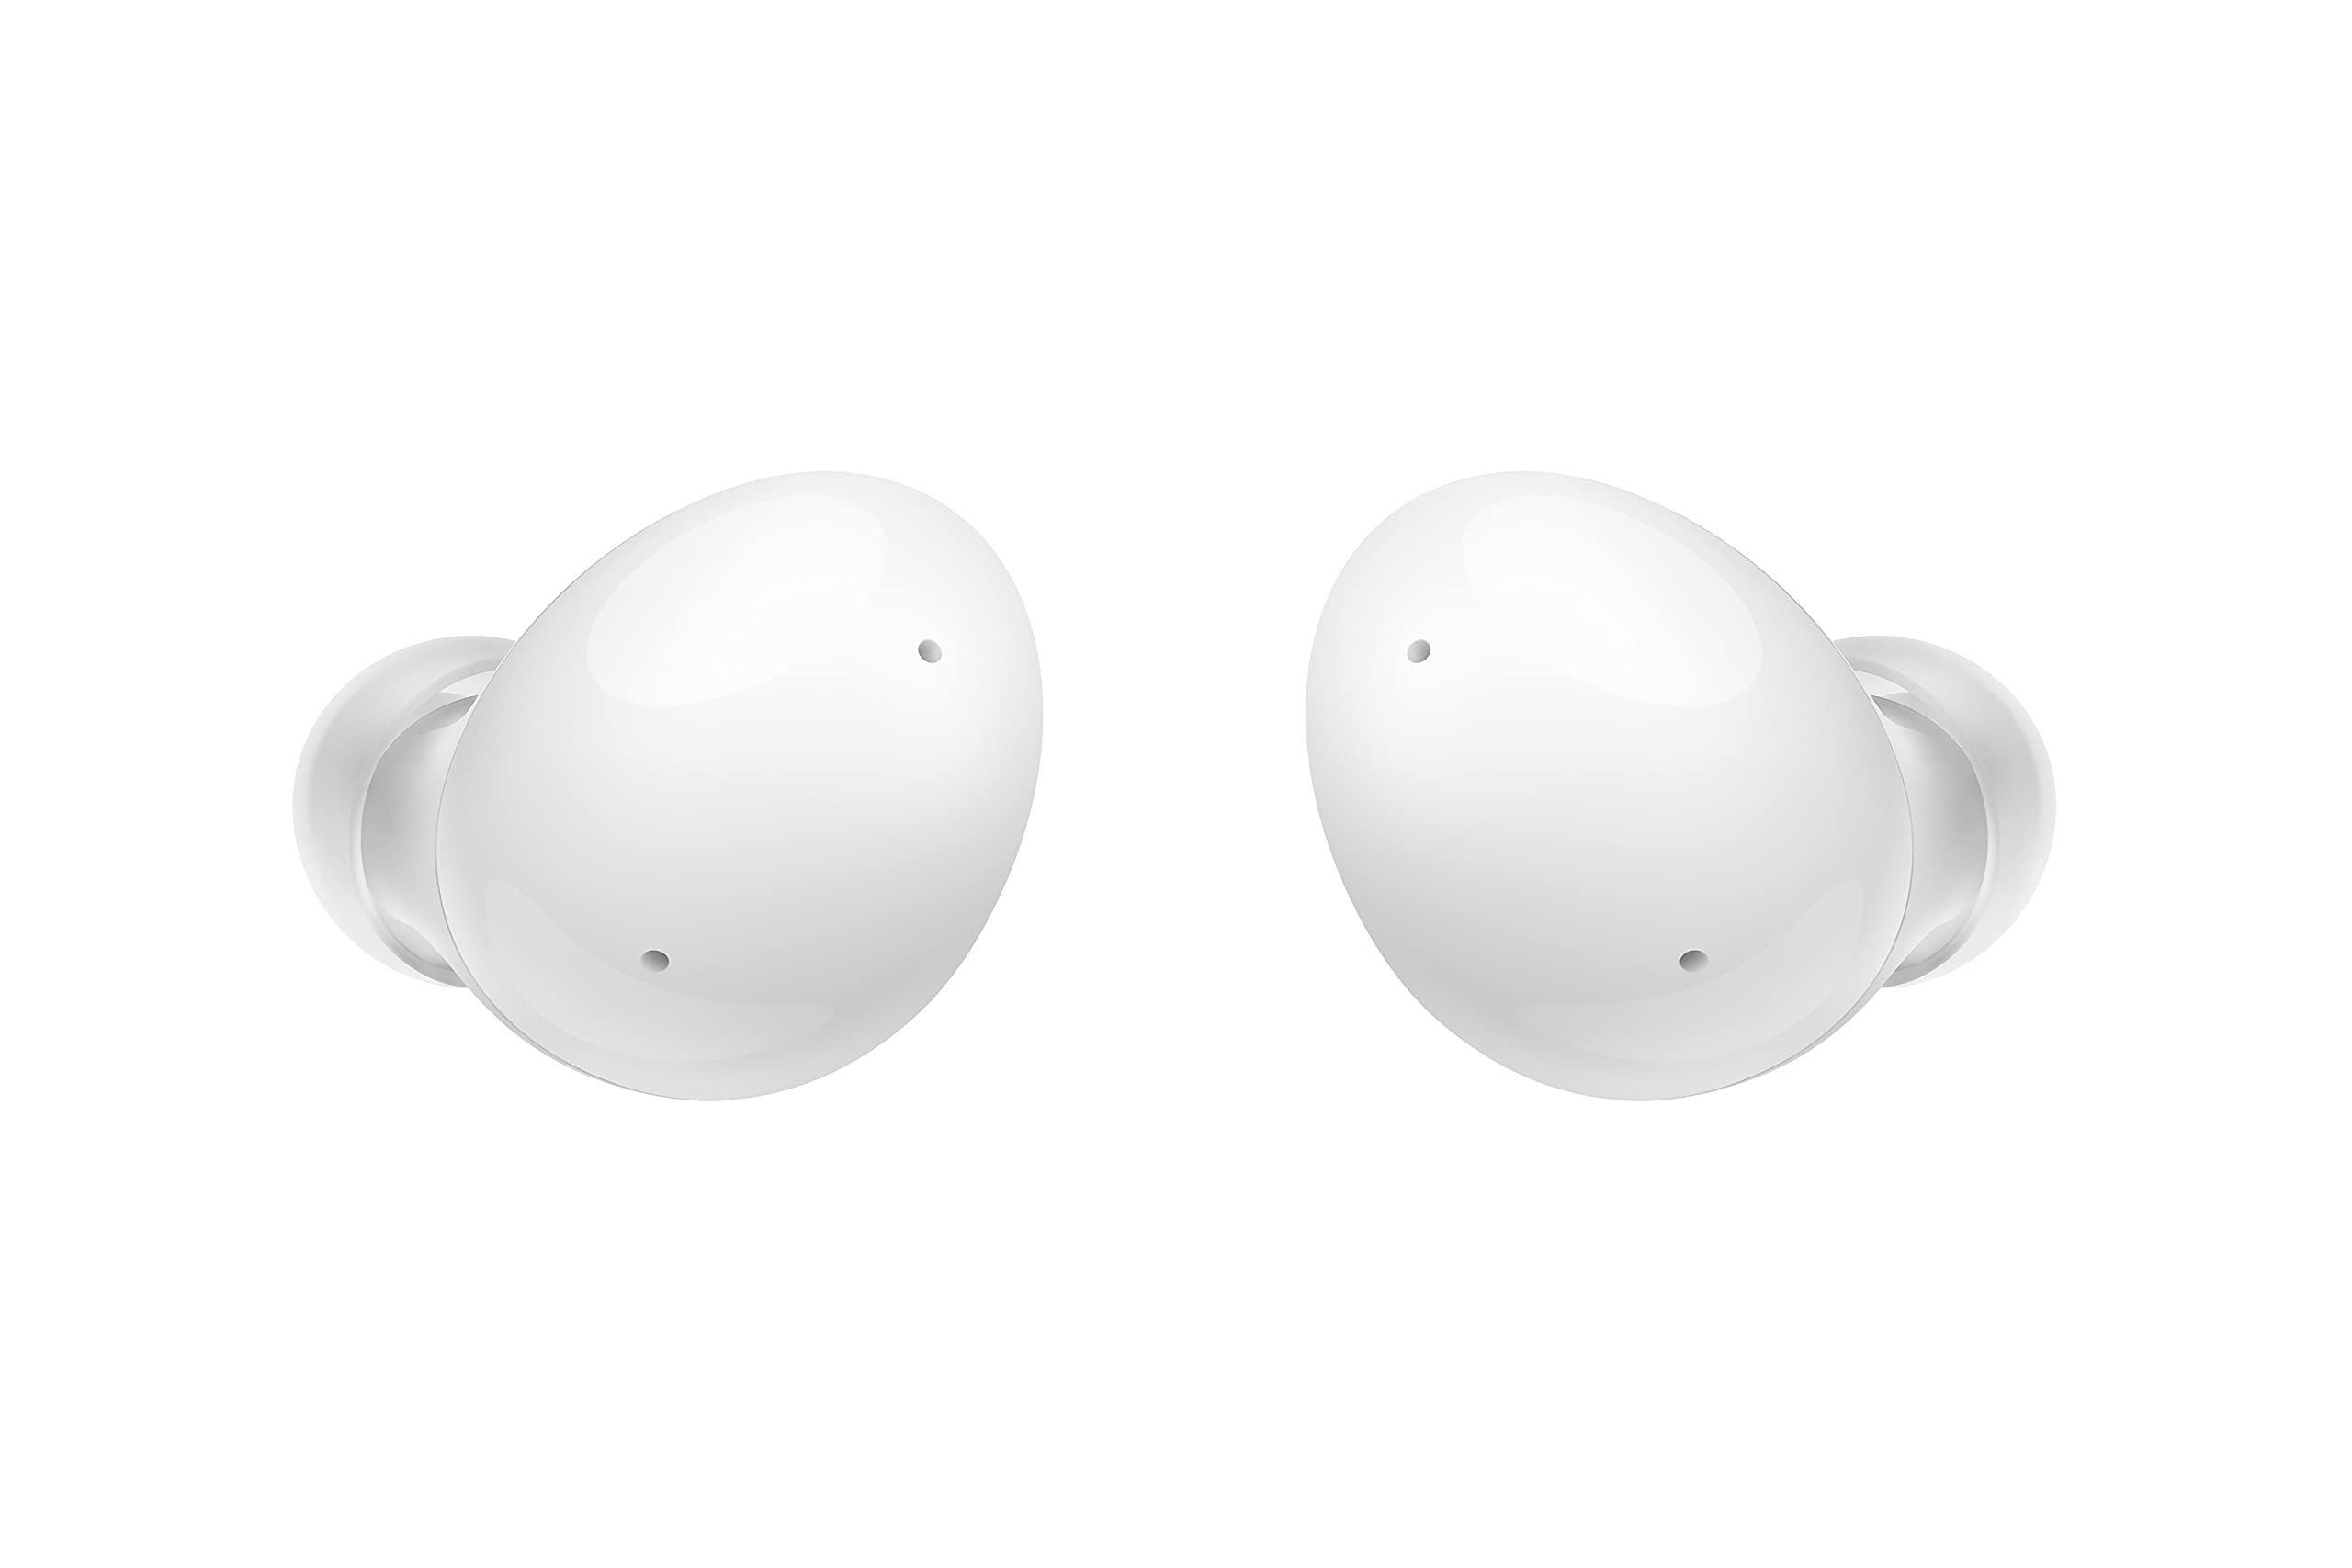 Forget AirPods—Samsung's Galaxy Buds 2 are under $100 today today